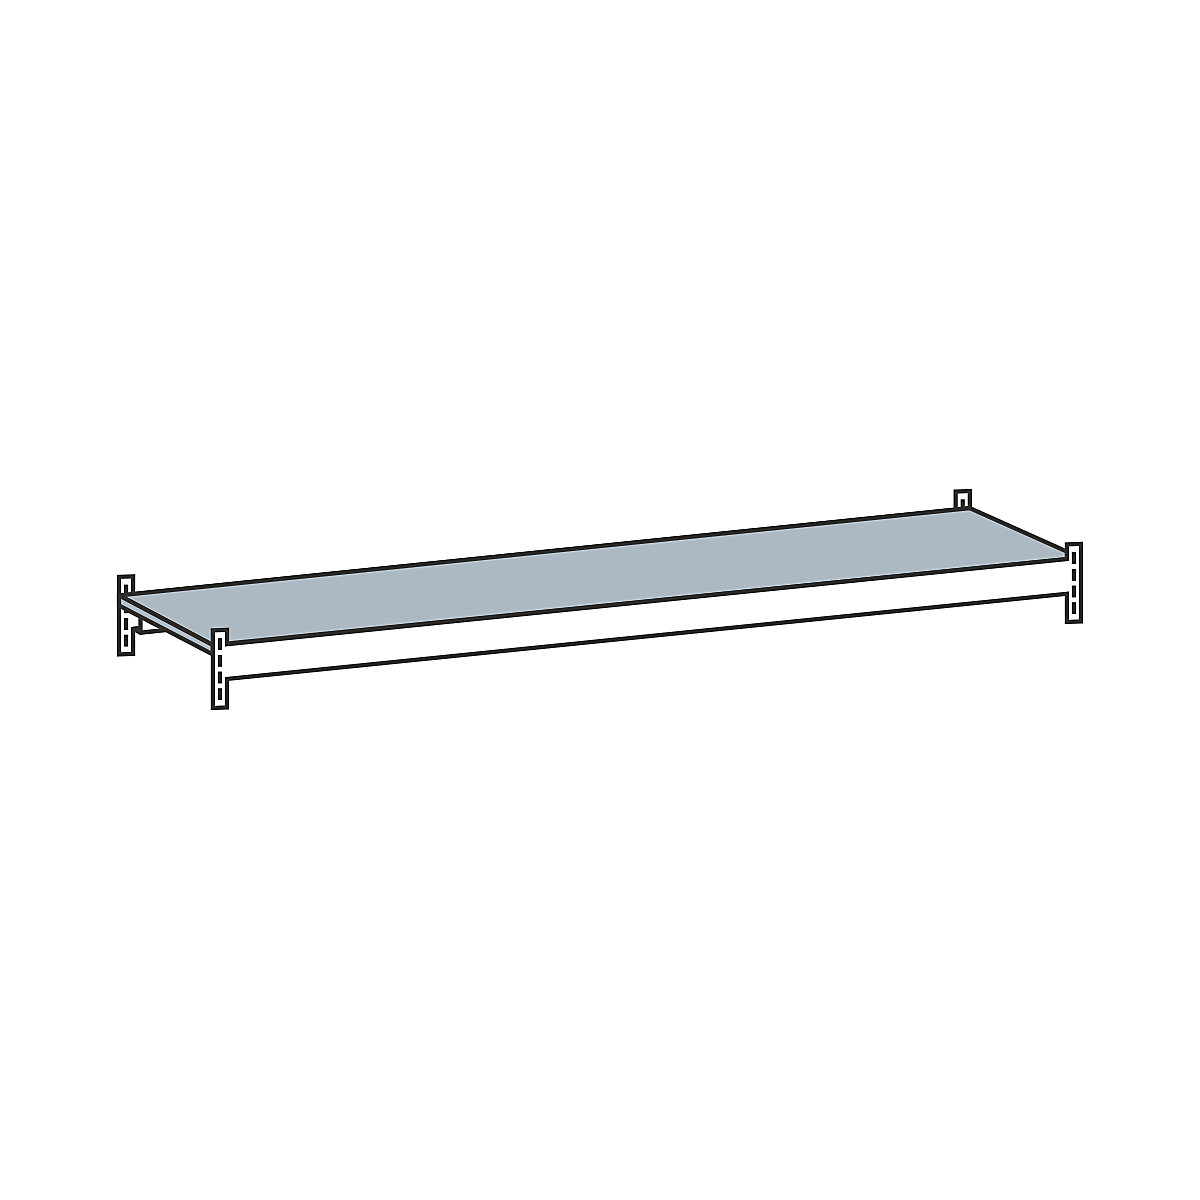 Additional level with steel shelf - SCHULTE